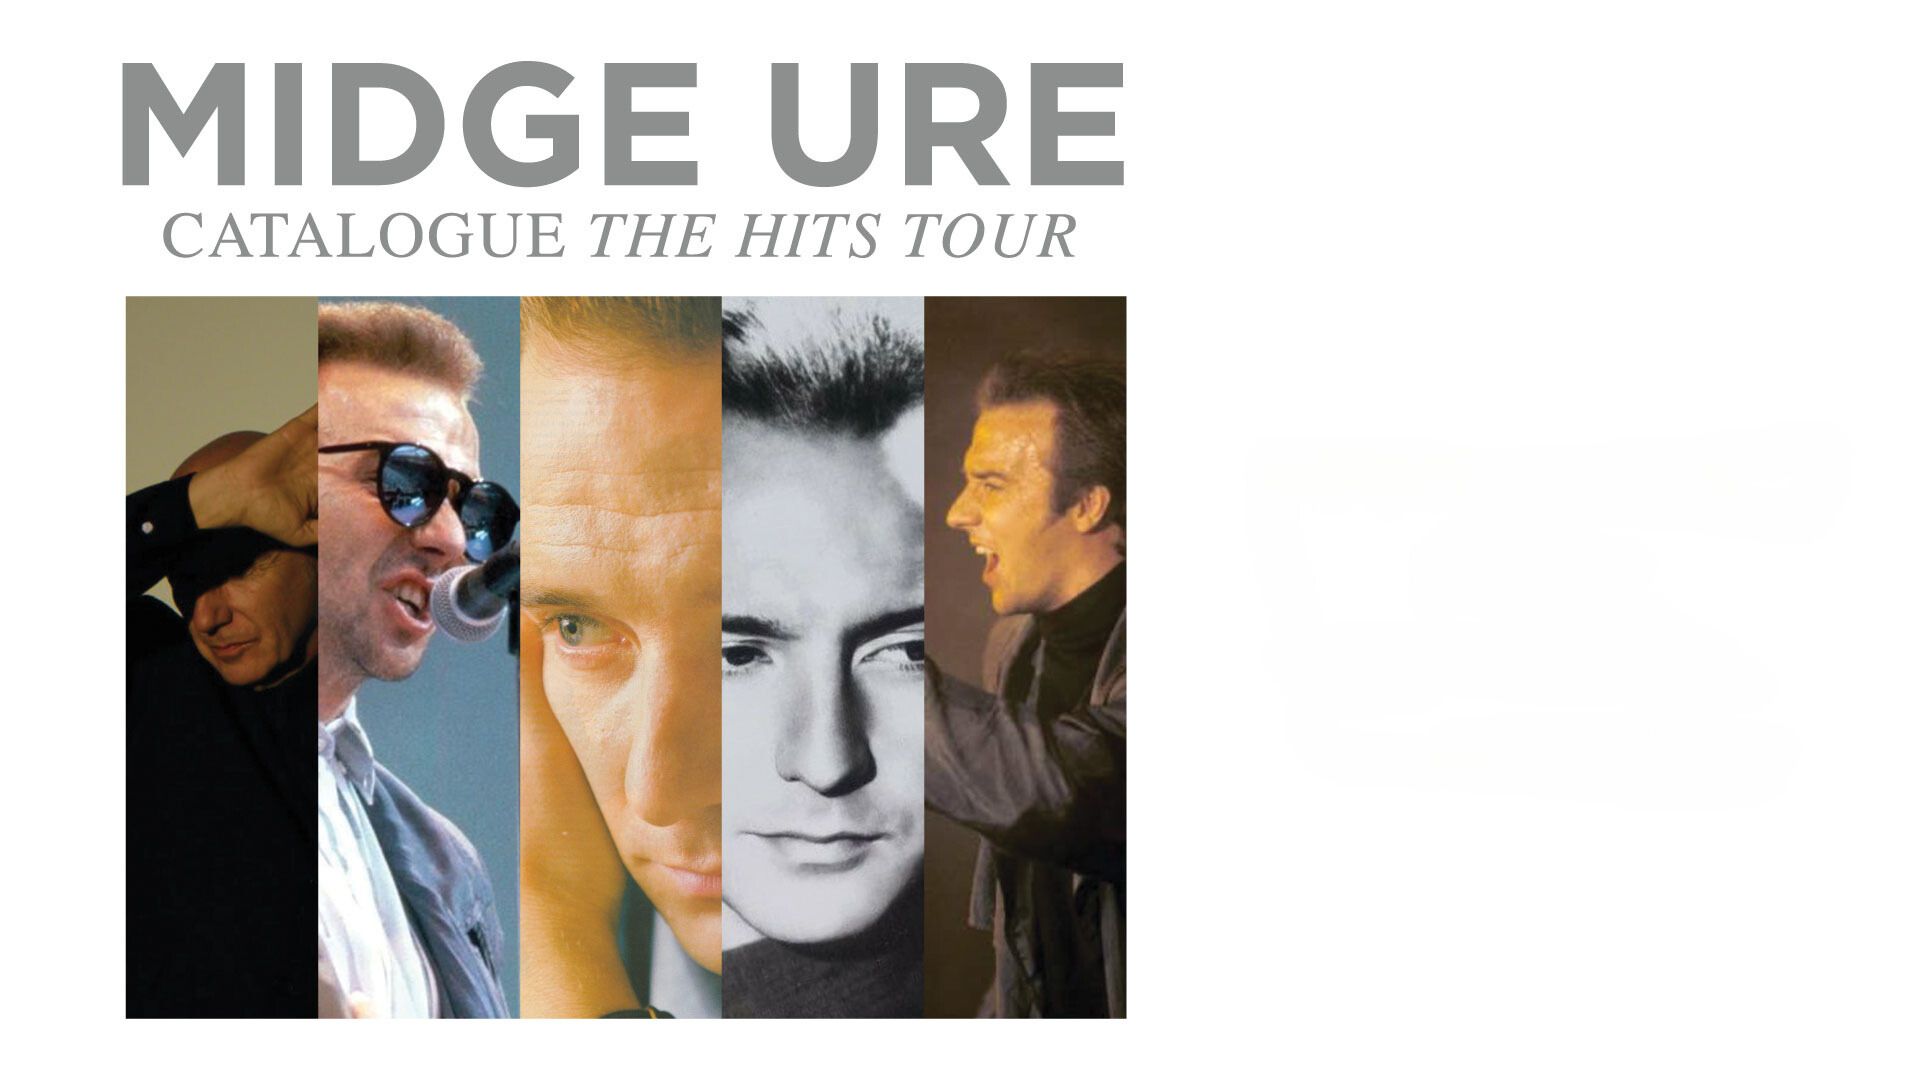 Five images of Midge Ure at various stages of his career from Ultravox to the present day